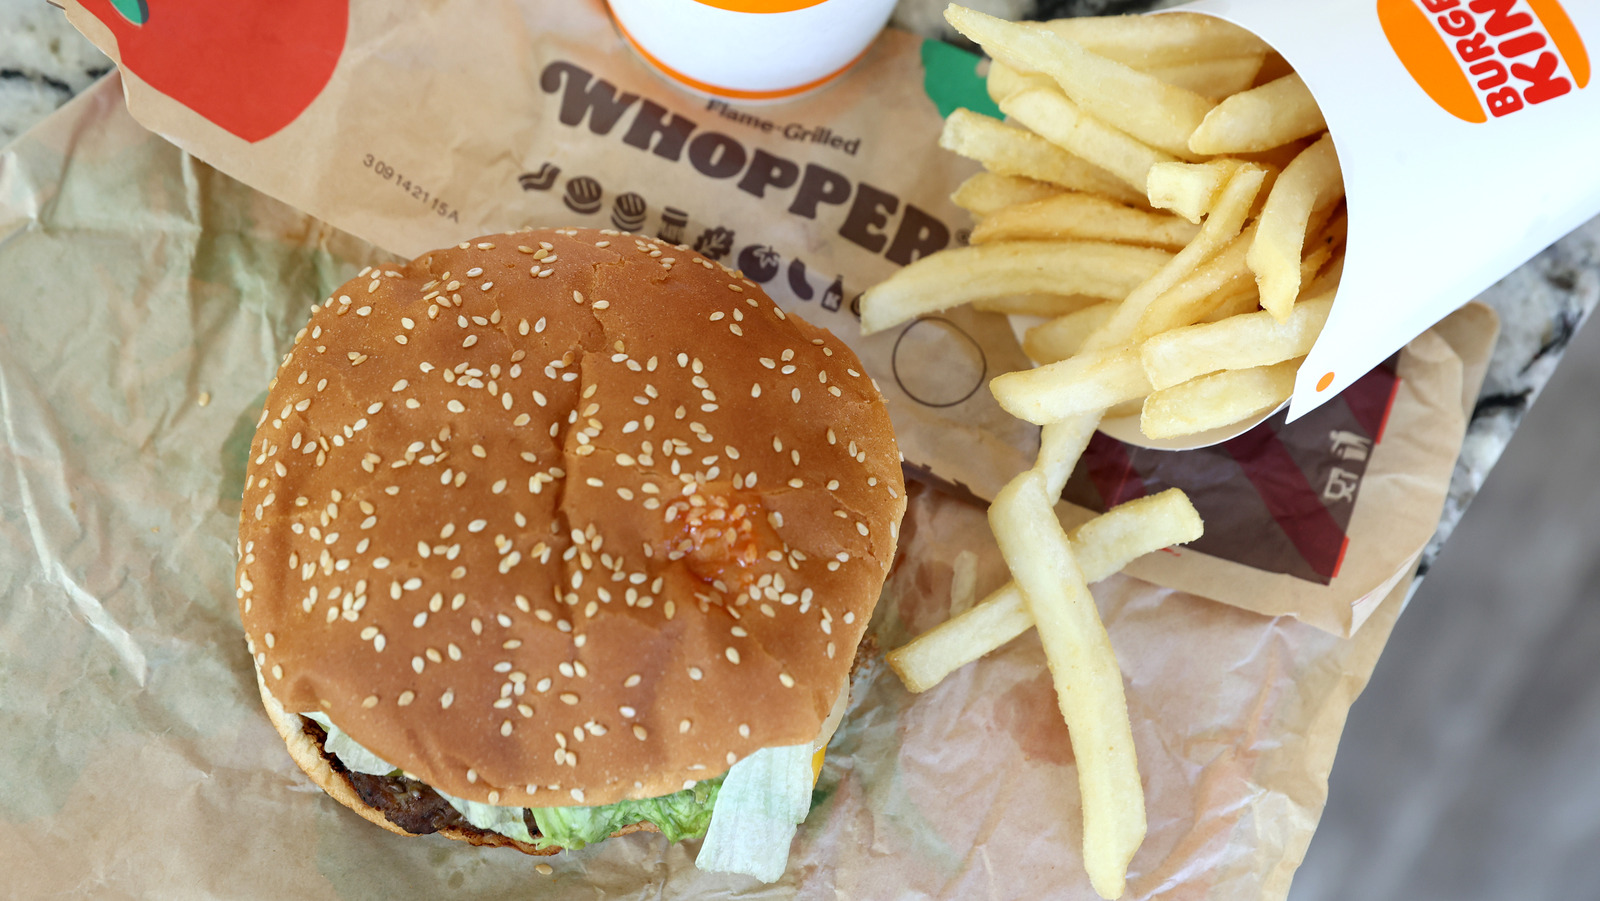 Facts You Never Knew About the Burger King Whopper